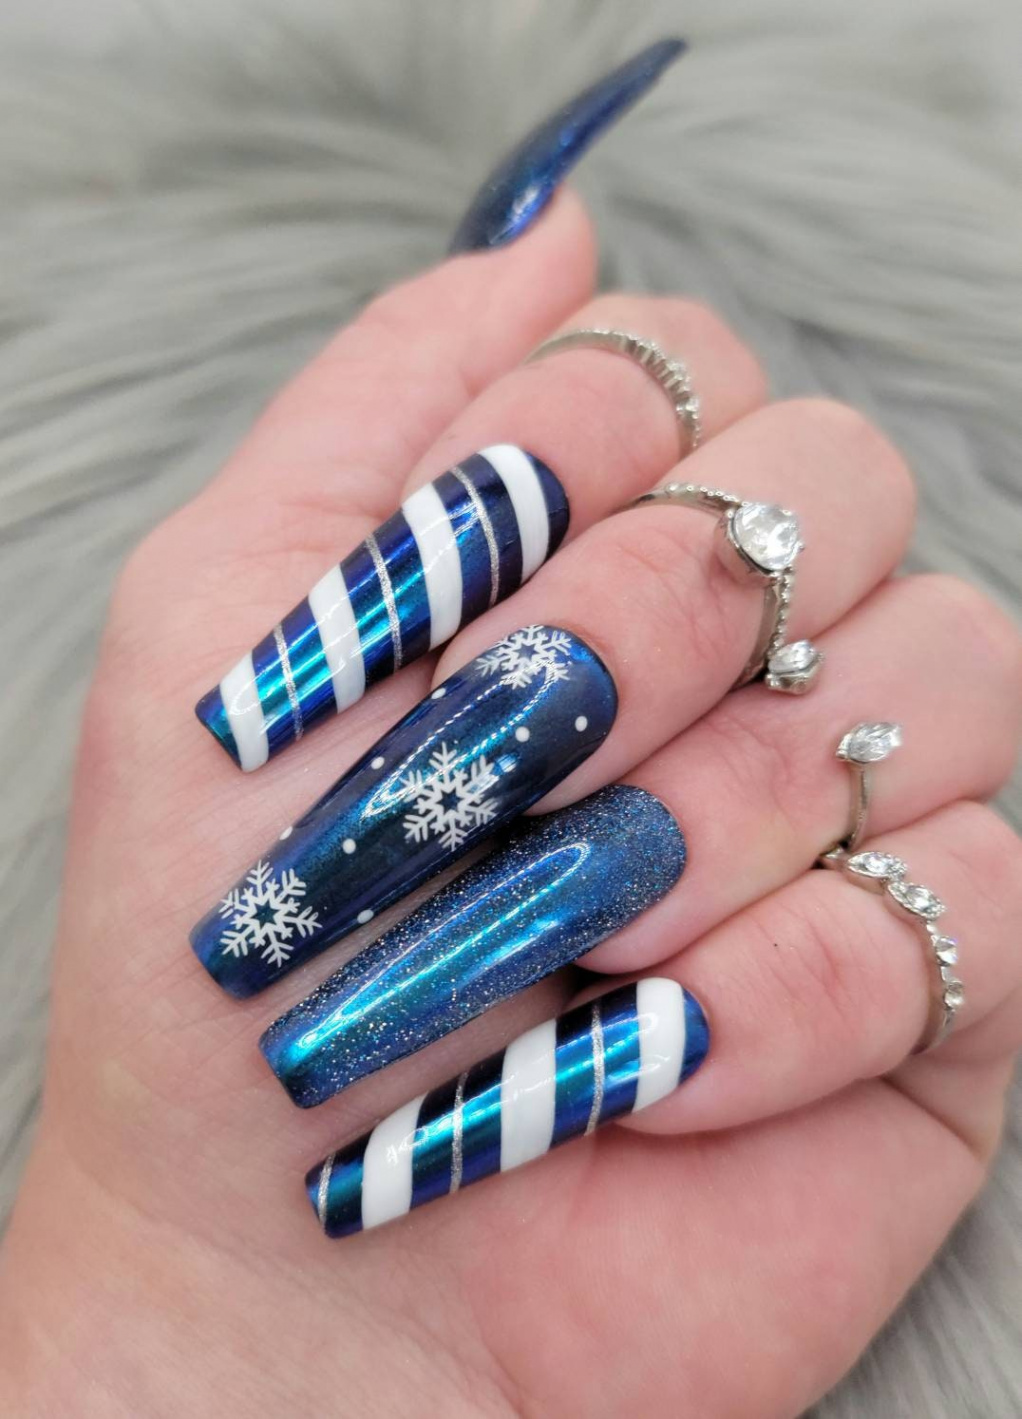 Christmas press on nails, blue chrome with snowflakes, reflective